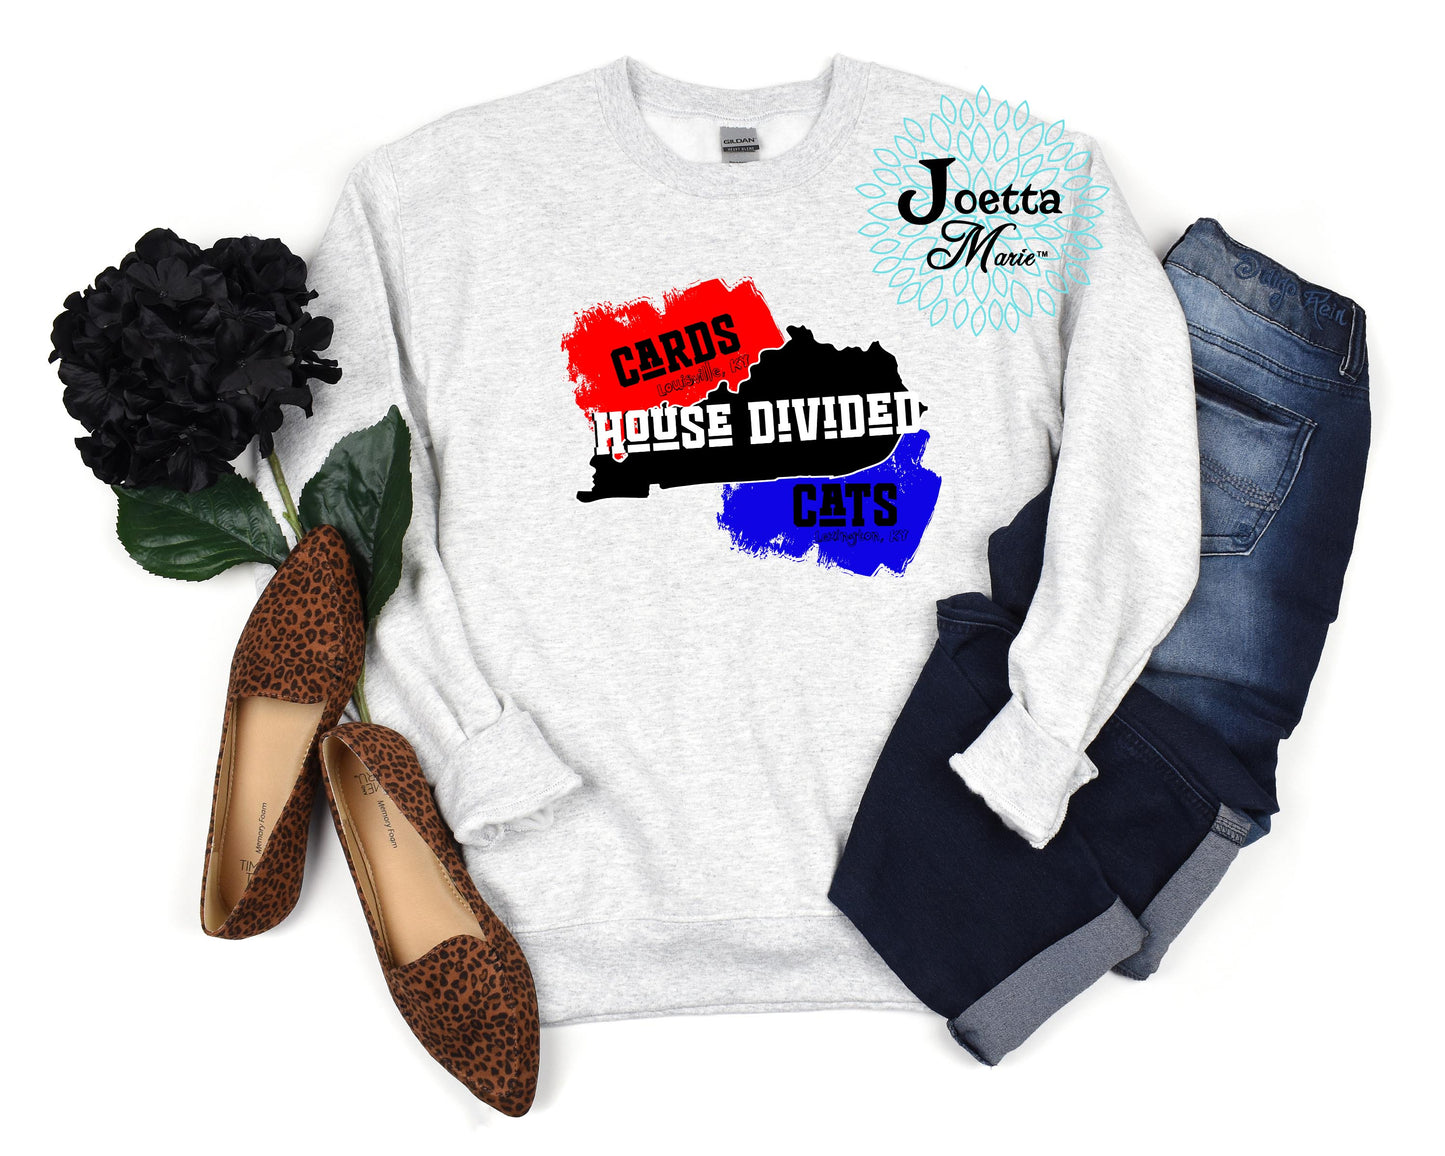 House Divided Cards and Cats Sweatshirt